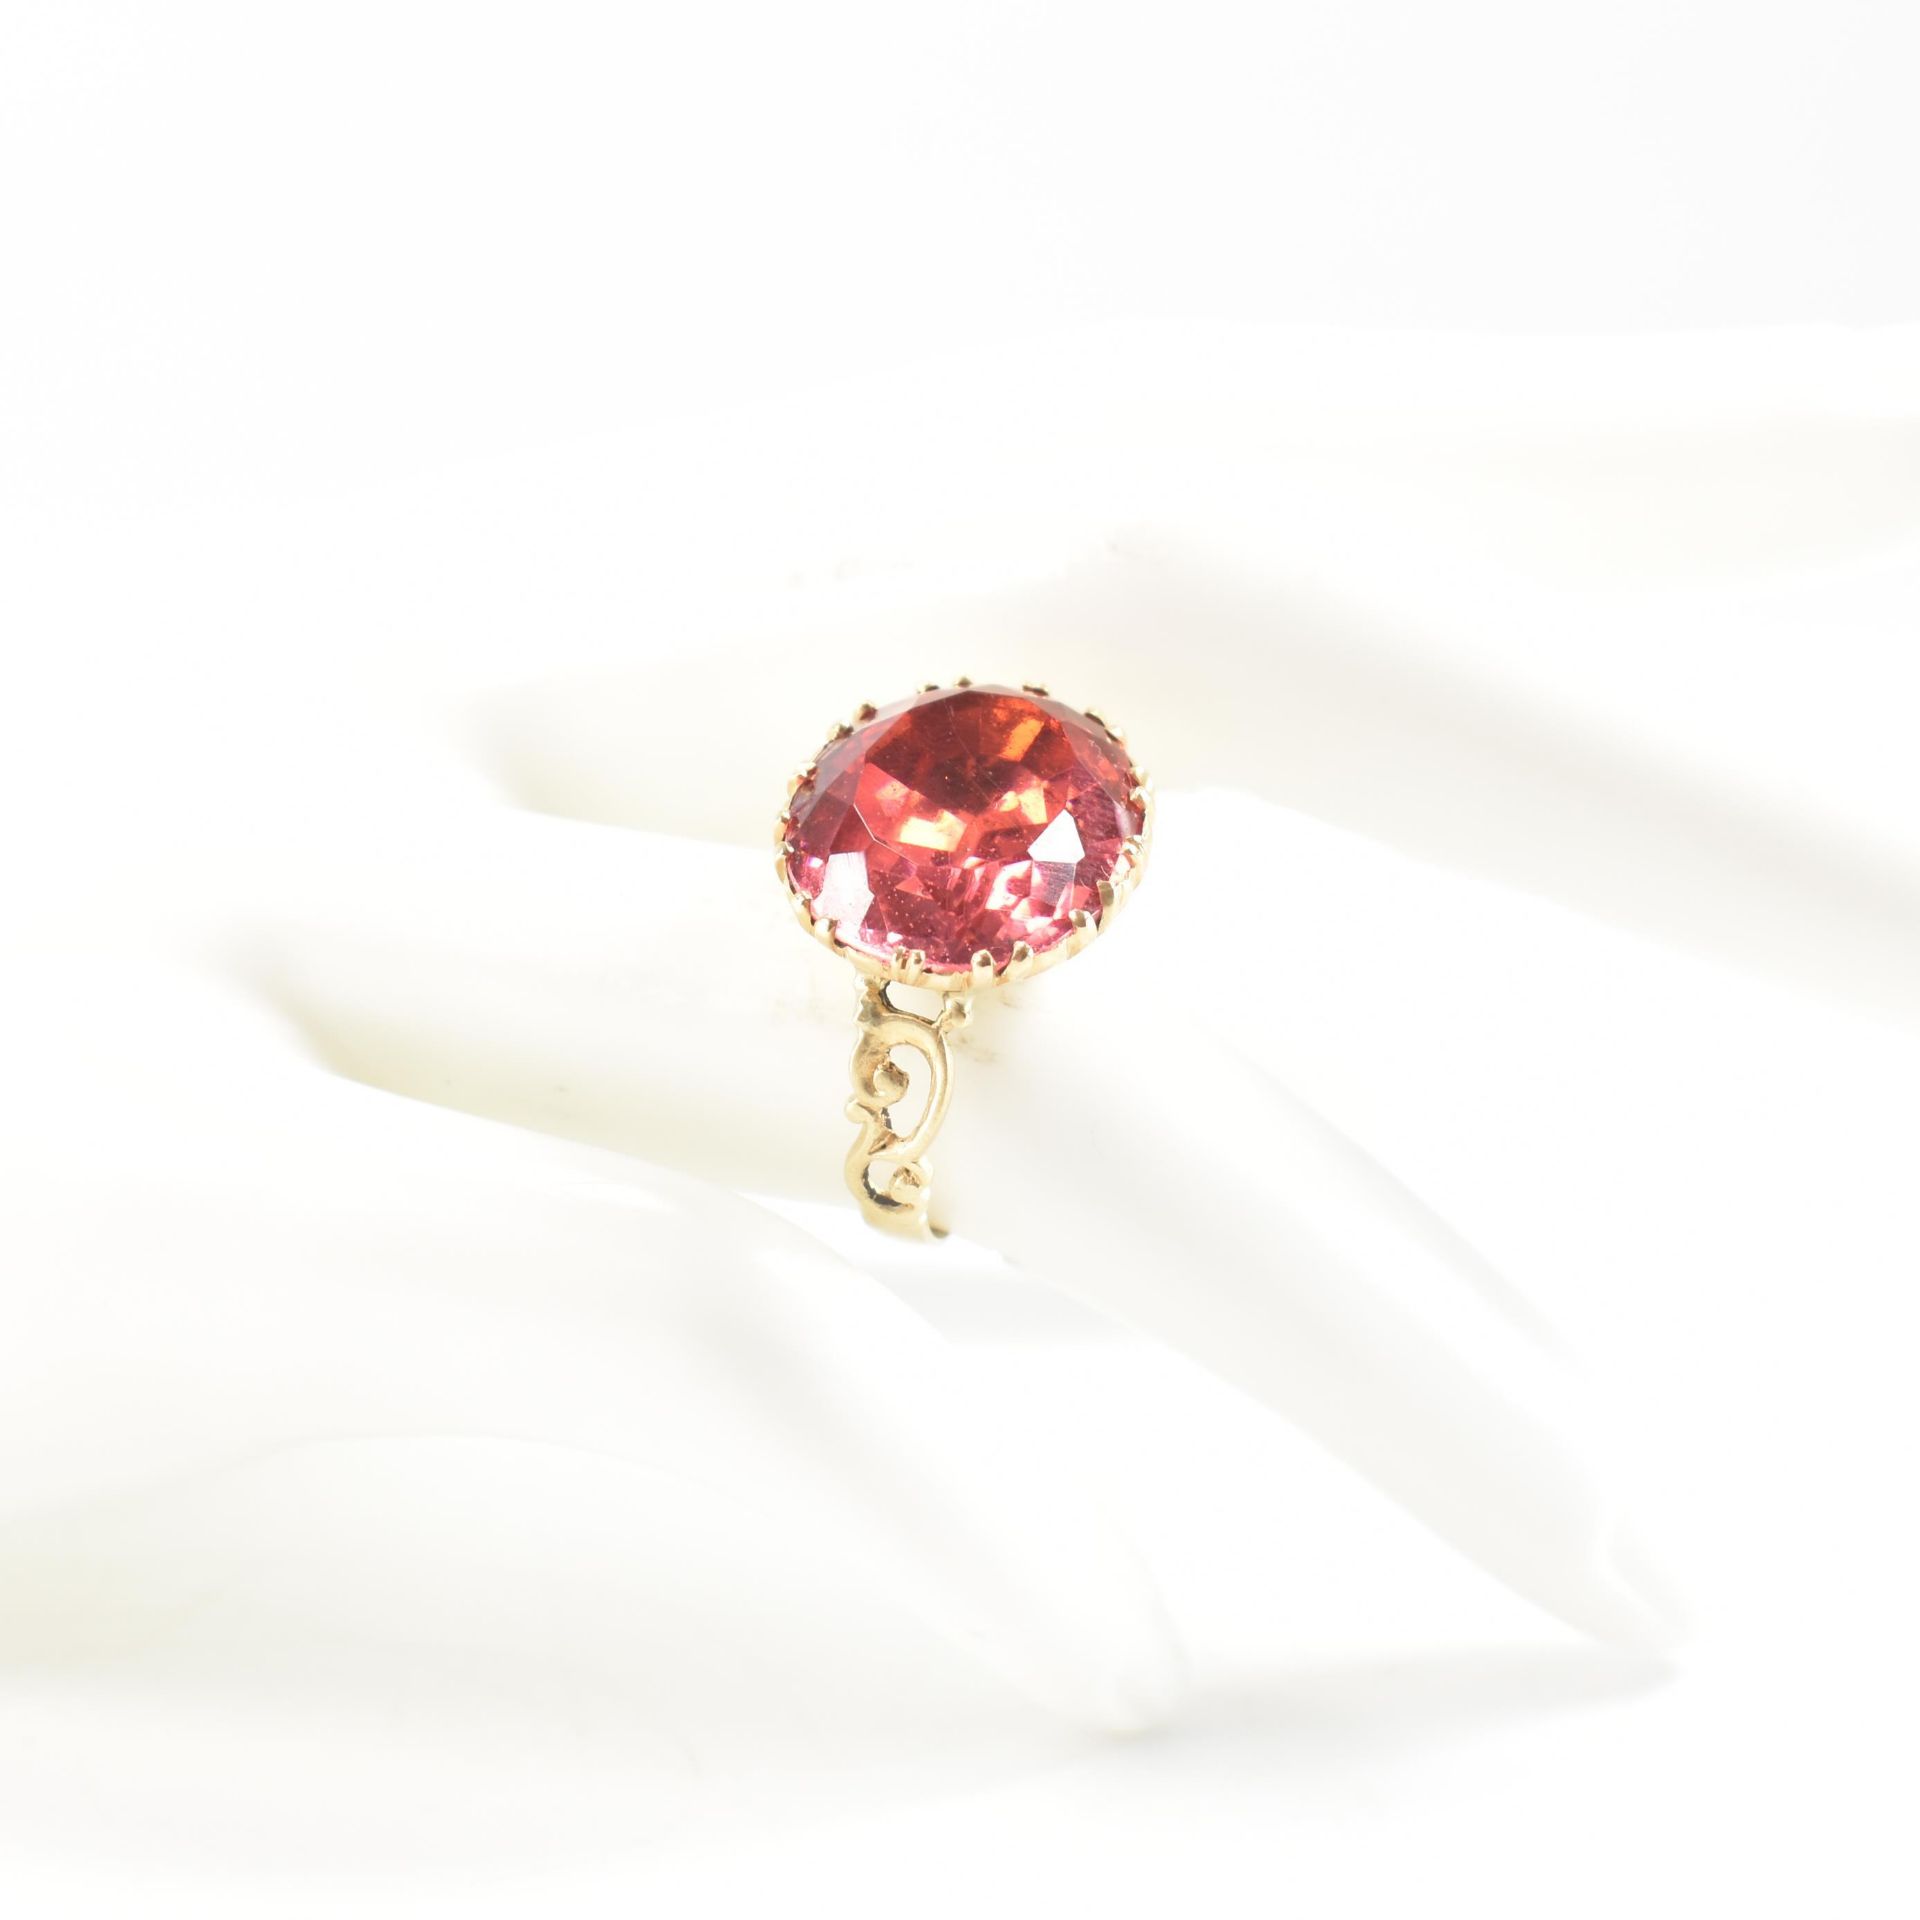 ANTIQUE GOLD & RED PINK PASTE STONE DRESS RING - Image 8 of 8